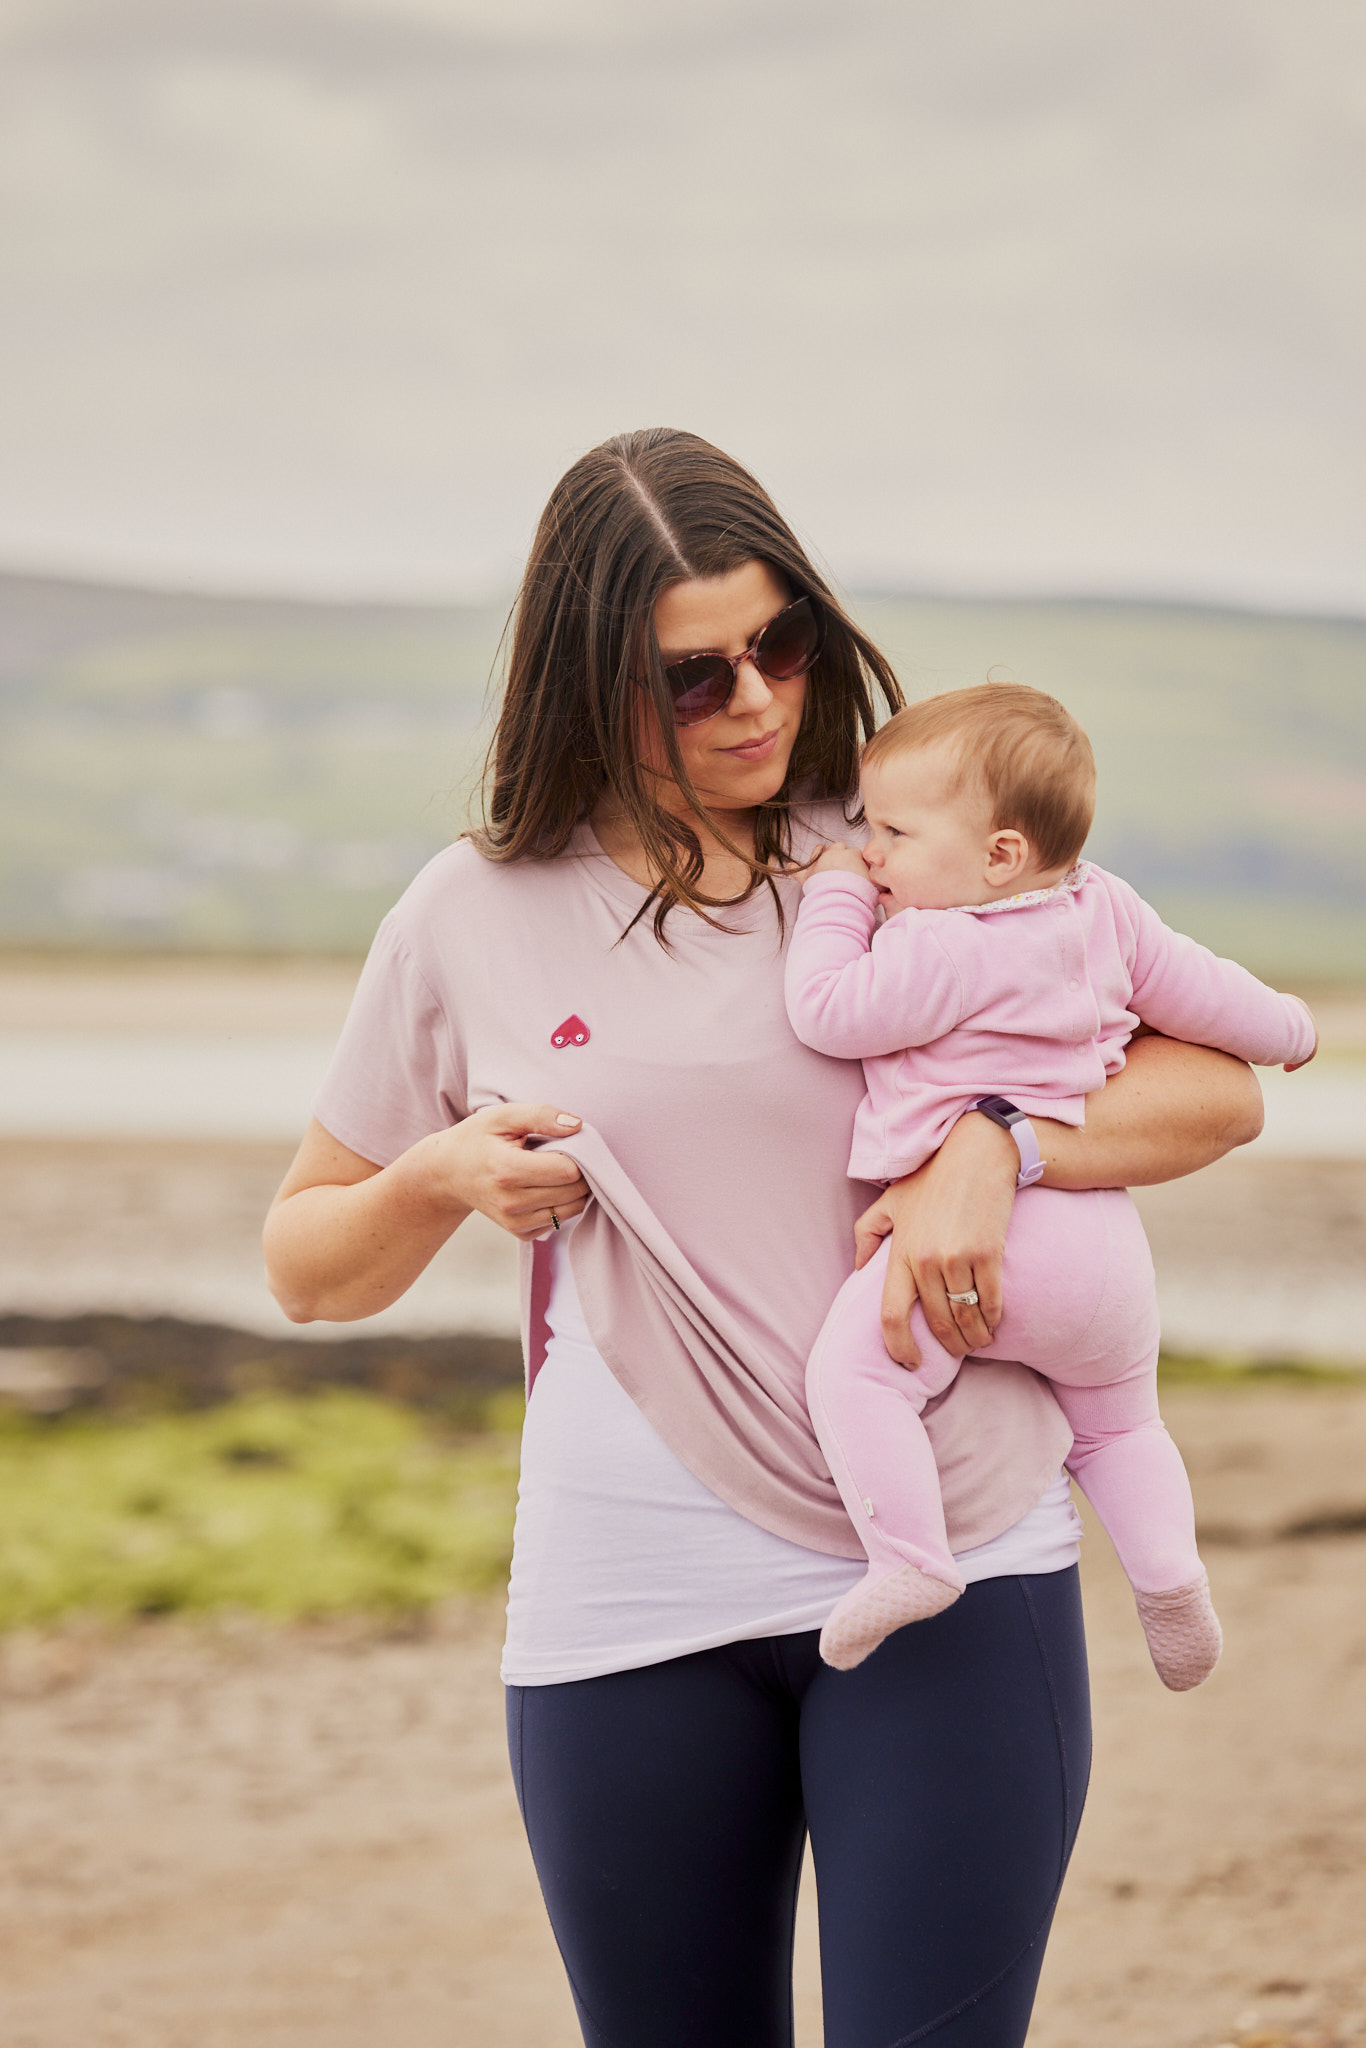 Woman playing on beach holding child wearing feed me mother apparel about to start breastfeeding.